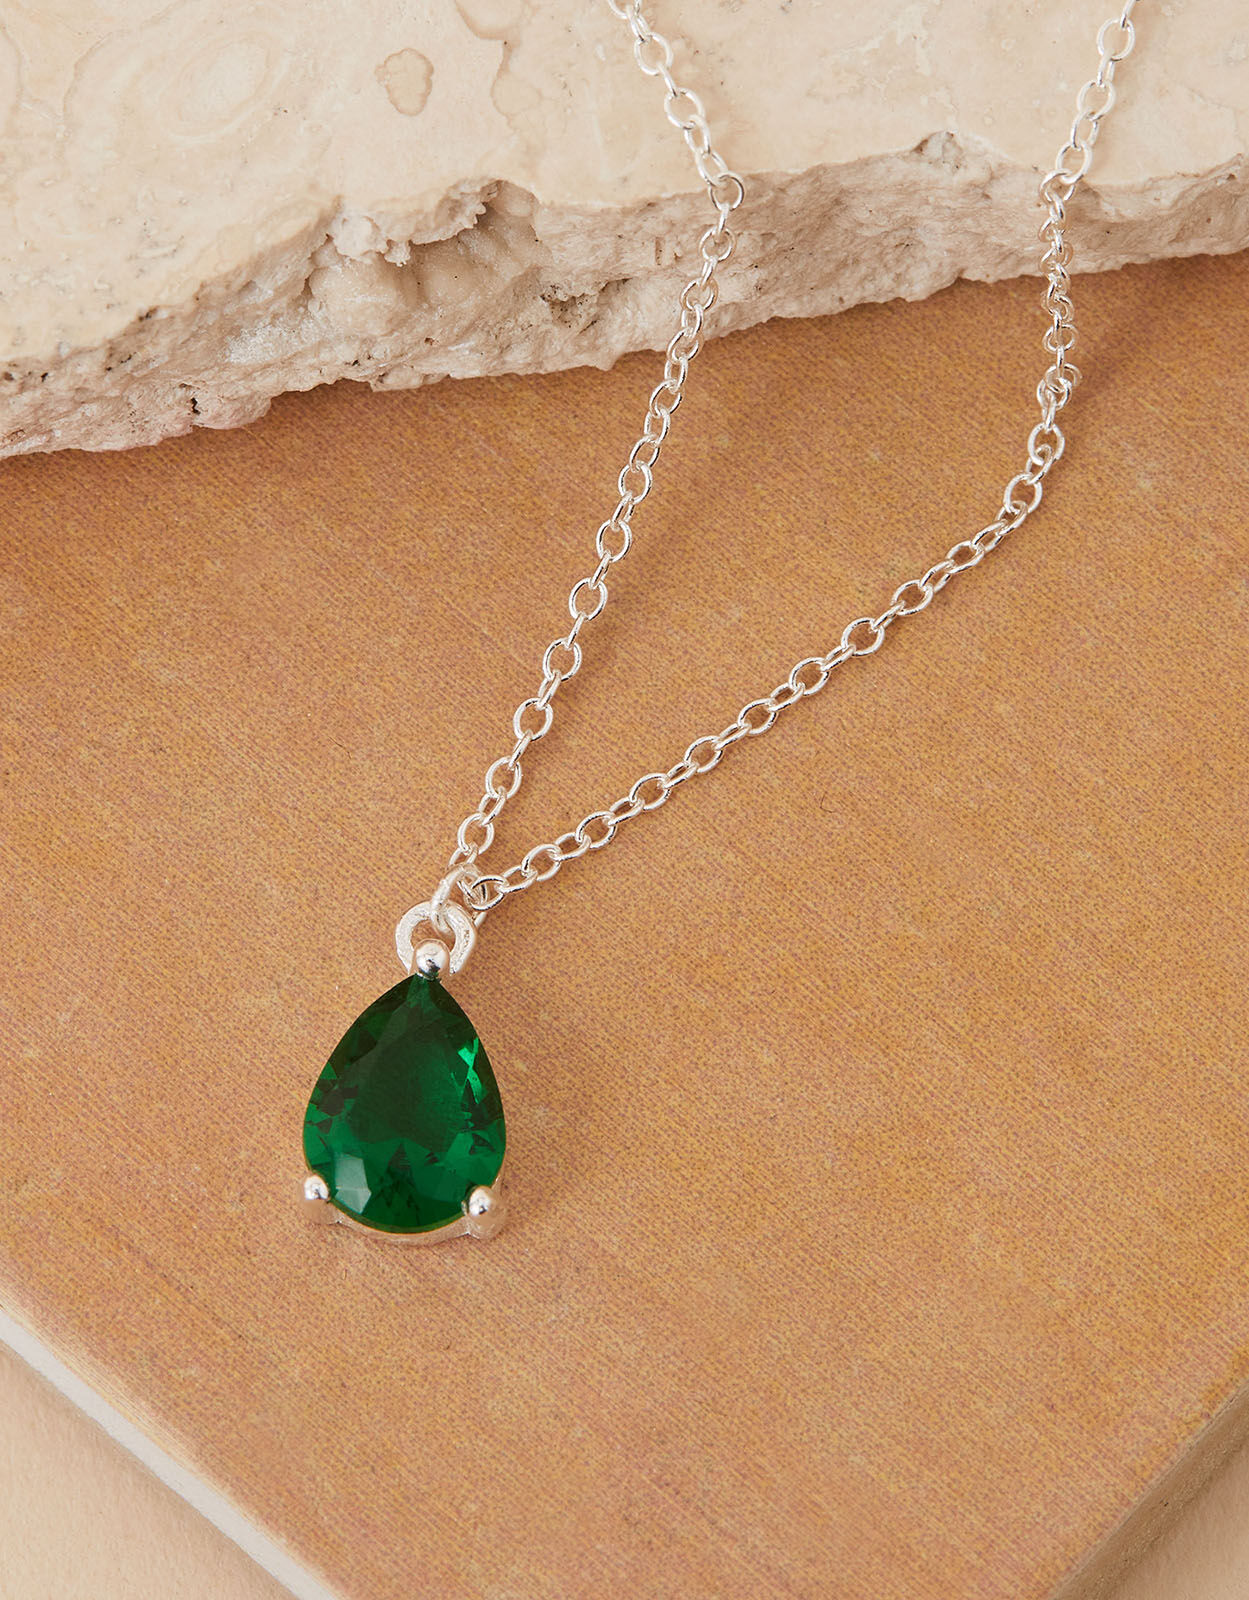 Queen Emerald Charm Necklace, Big and Bold, Large Natural Glowing Neon  Green Colombian Emerald Diamond Choker Necklace, Luxury Gift for Her - Etsy